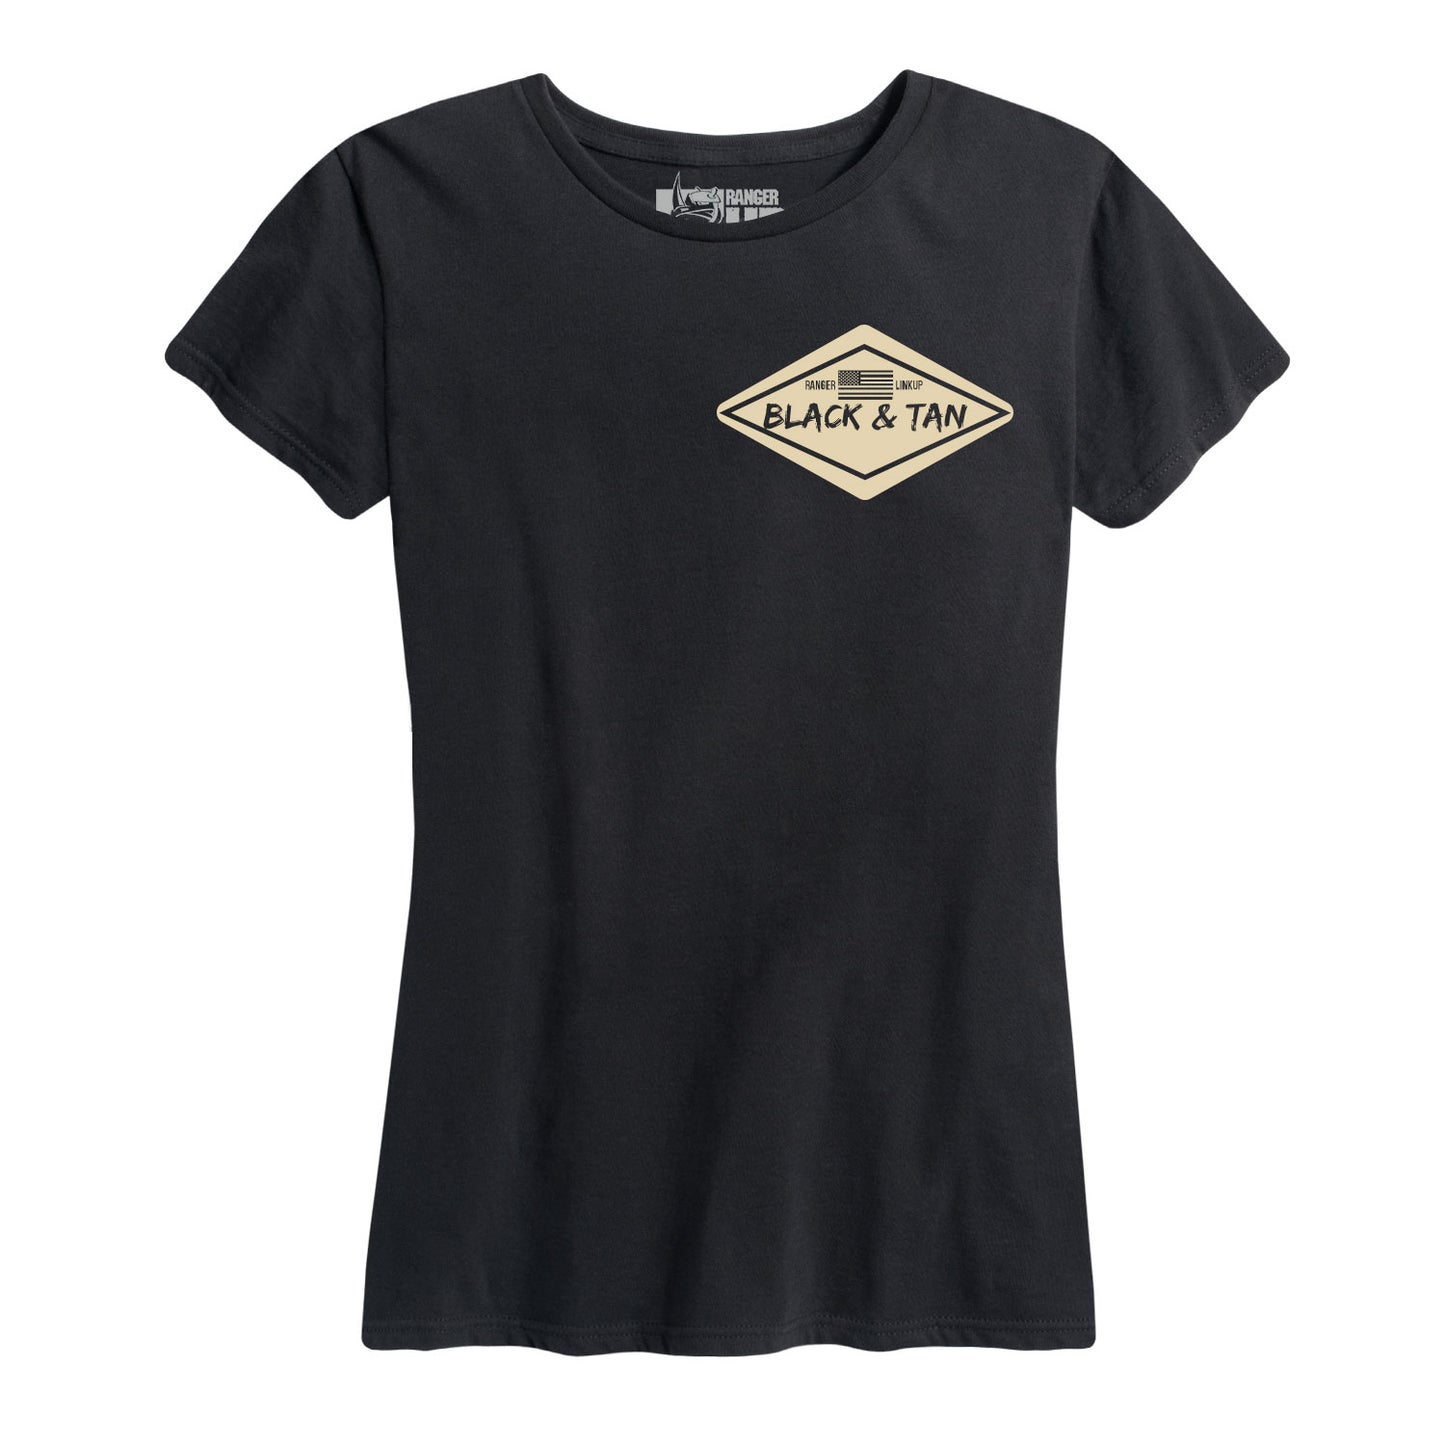 Women's Darby Project Black and Tan Tee